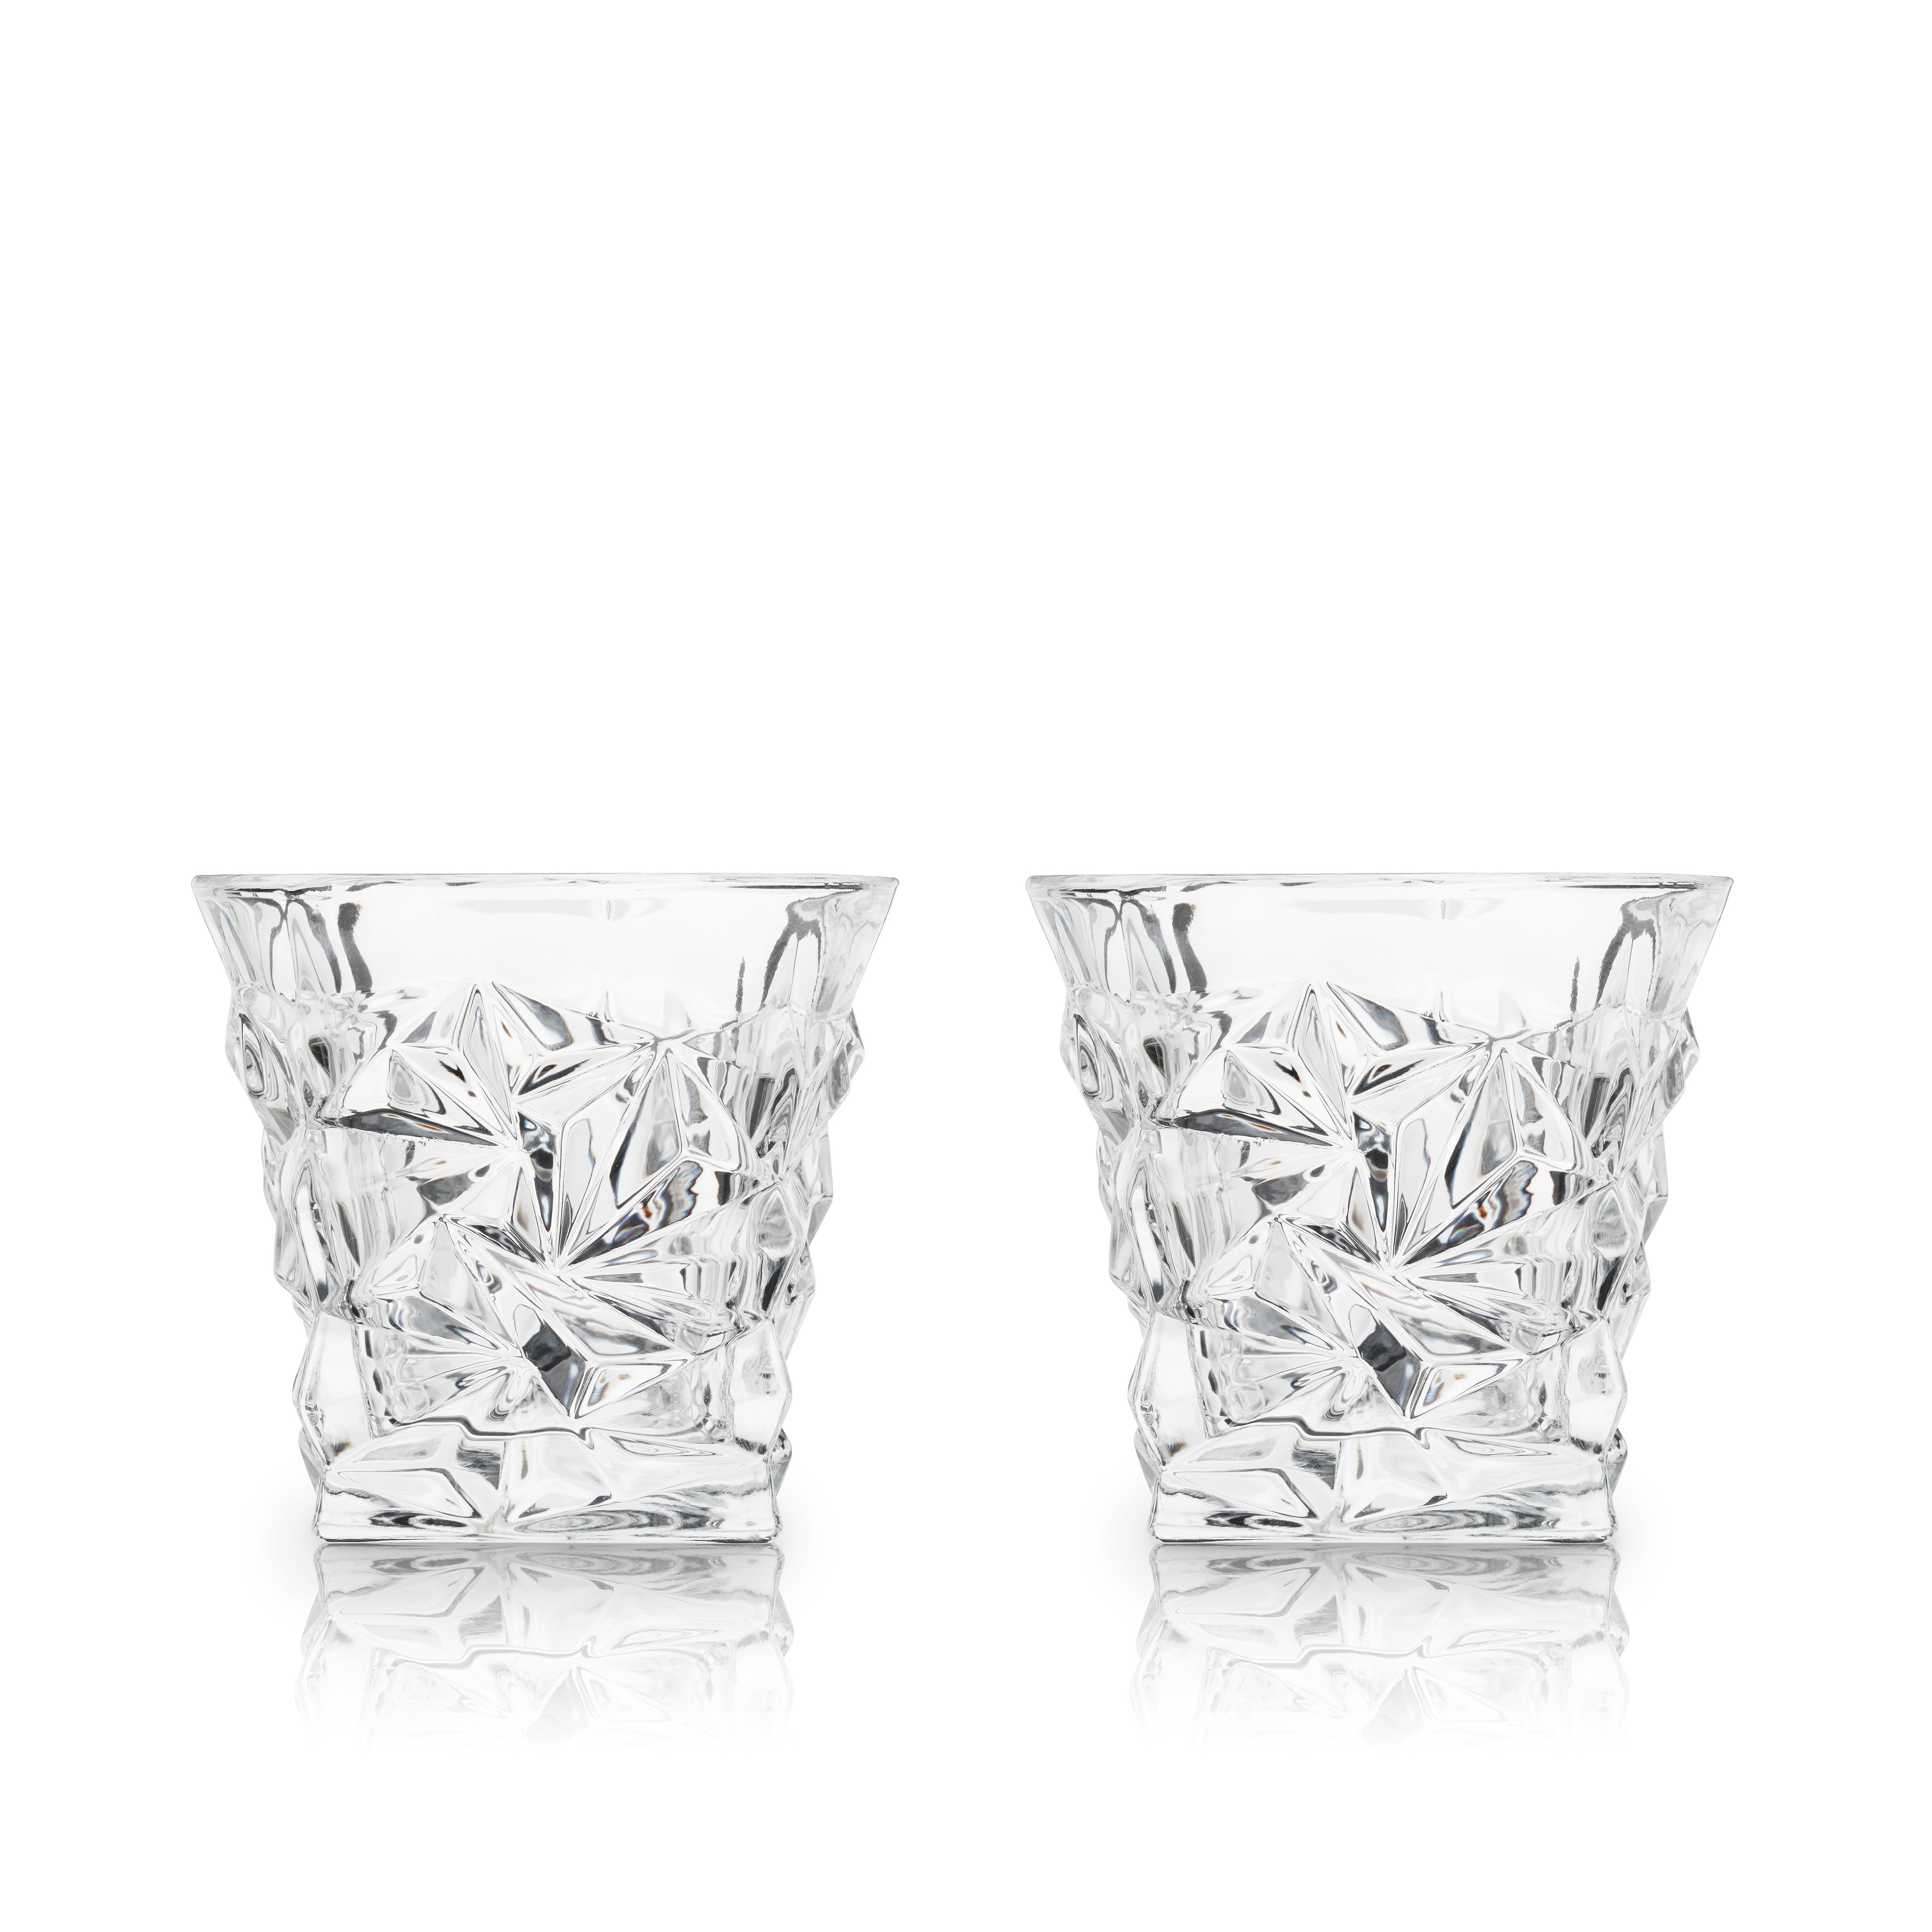 Viski Whiskey Glasses with Heavy Footed Base - Crystal Tumblers for Scotch,  Bourbon, Cocktails - 18.5 Oz, Set of 2, Clear